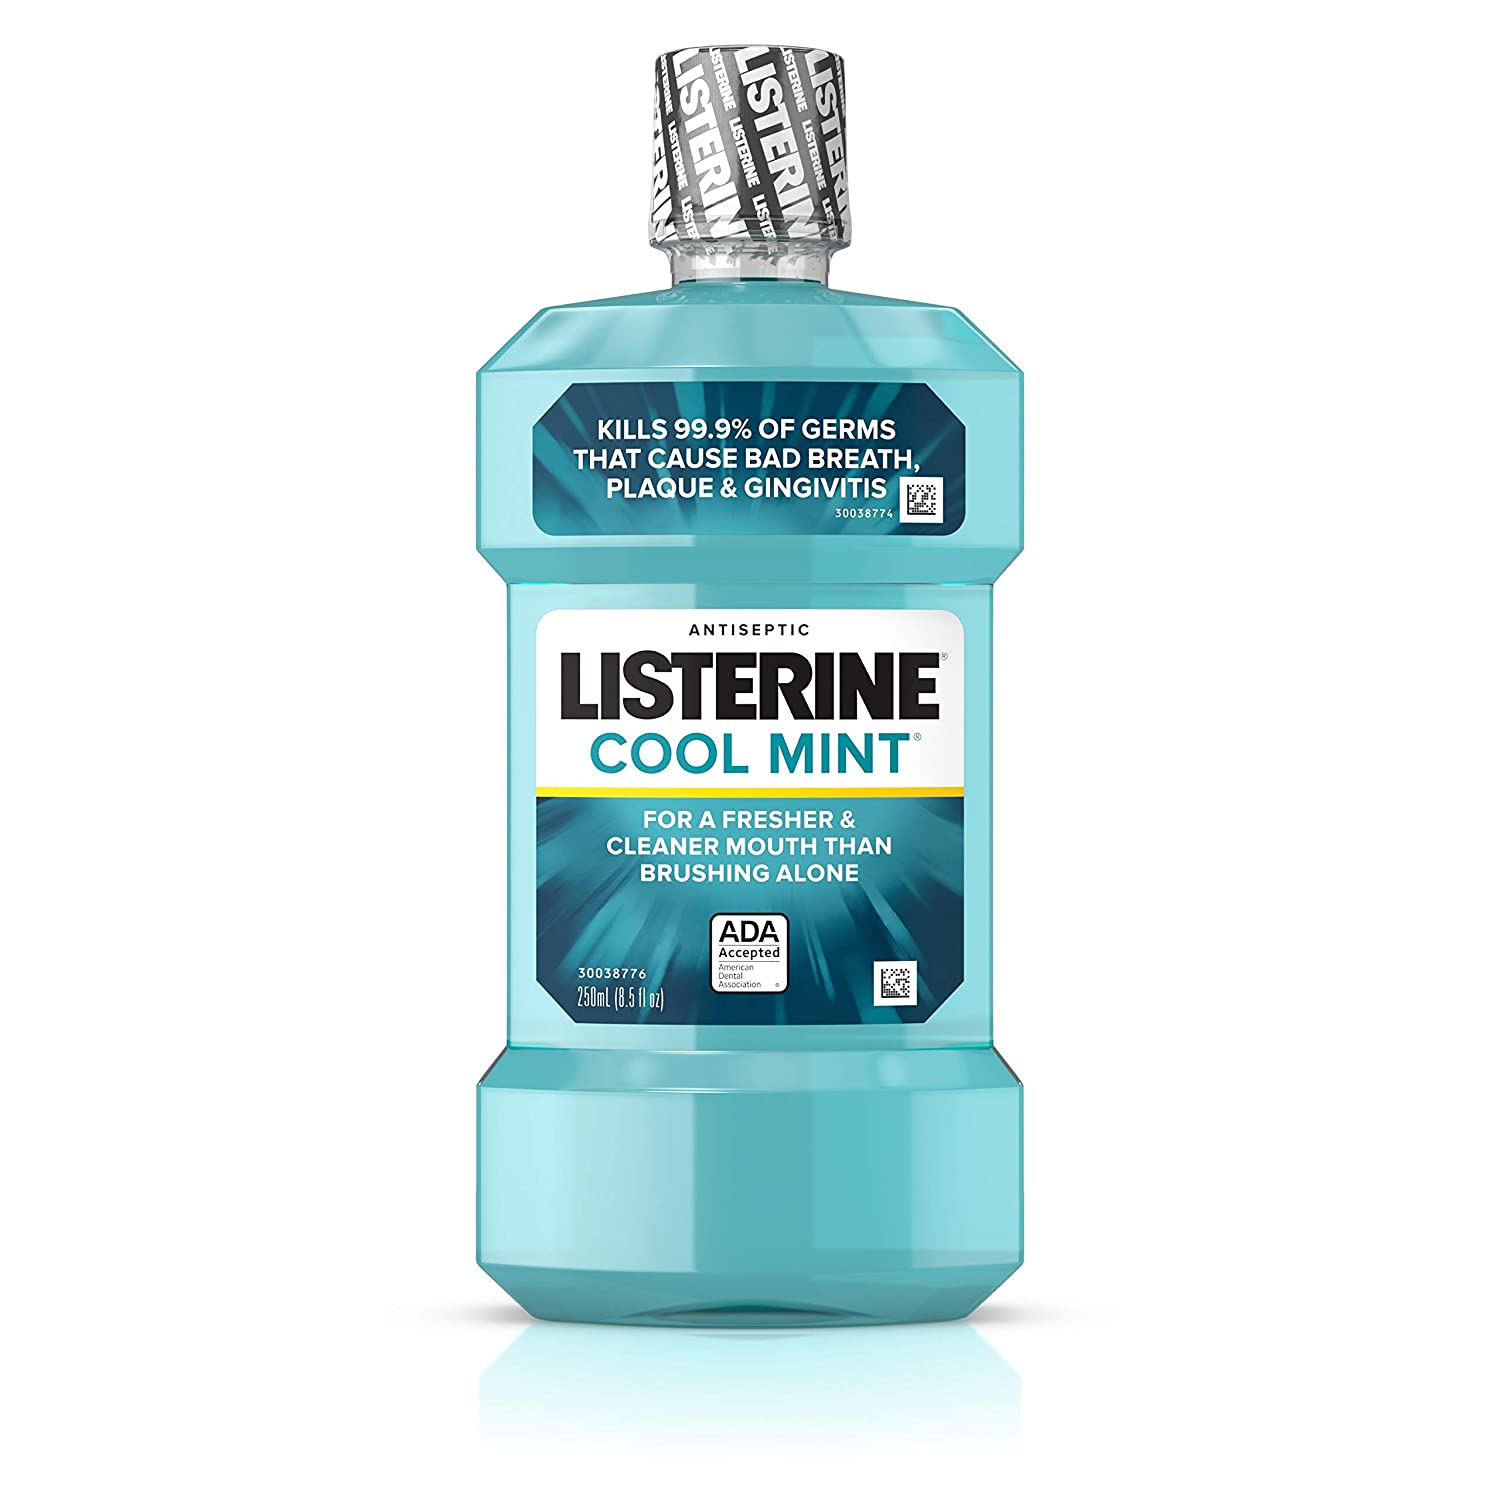 Listerine Cool Mint Antiseptic Mouthwash For Bad Breath Plaque And